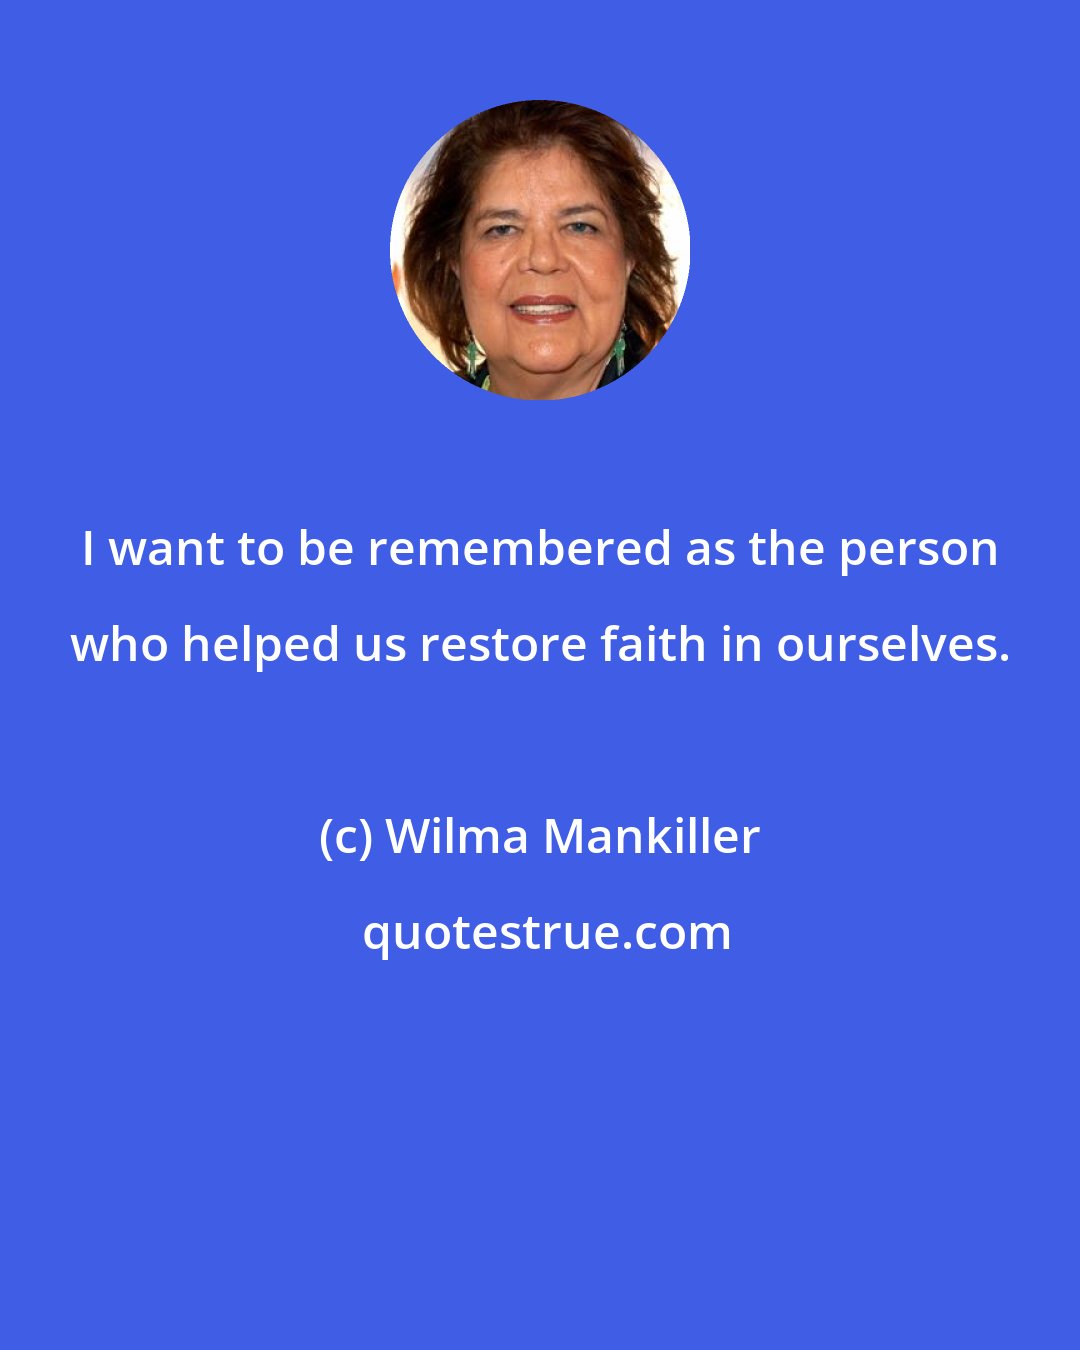 Wilma Mankiller: I want to be remembered as the person who helped us restore faith in ourselves.